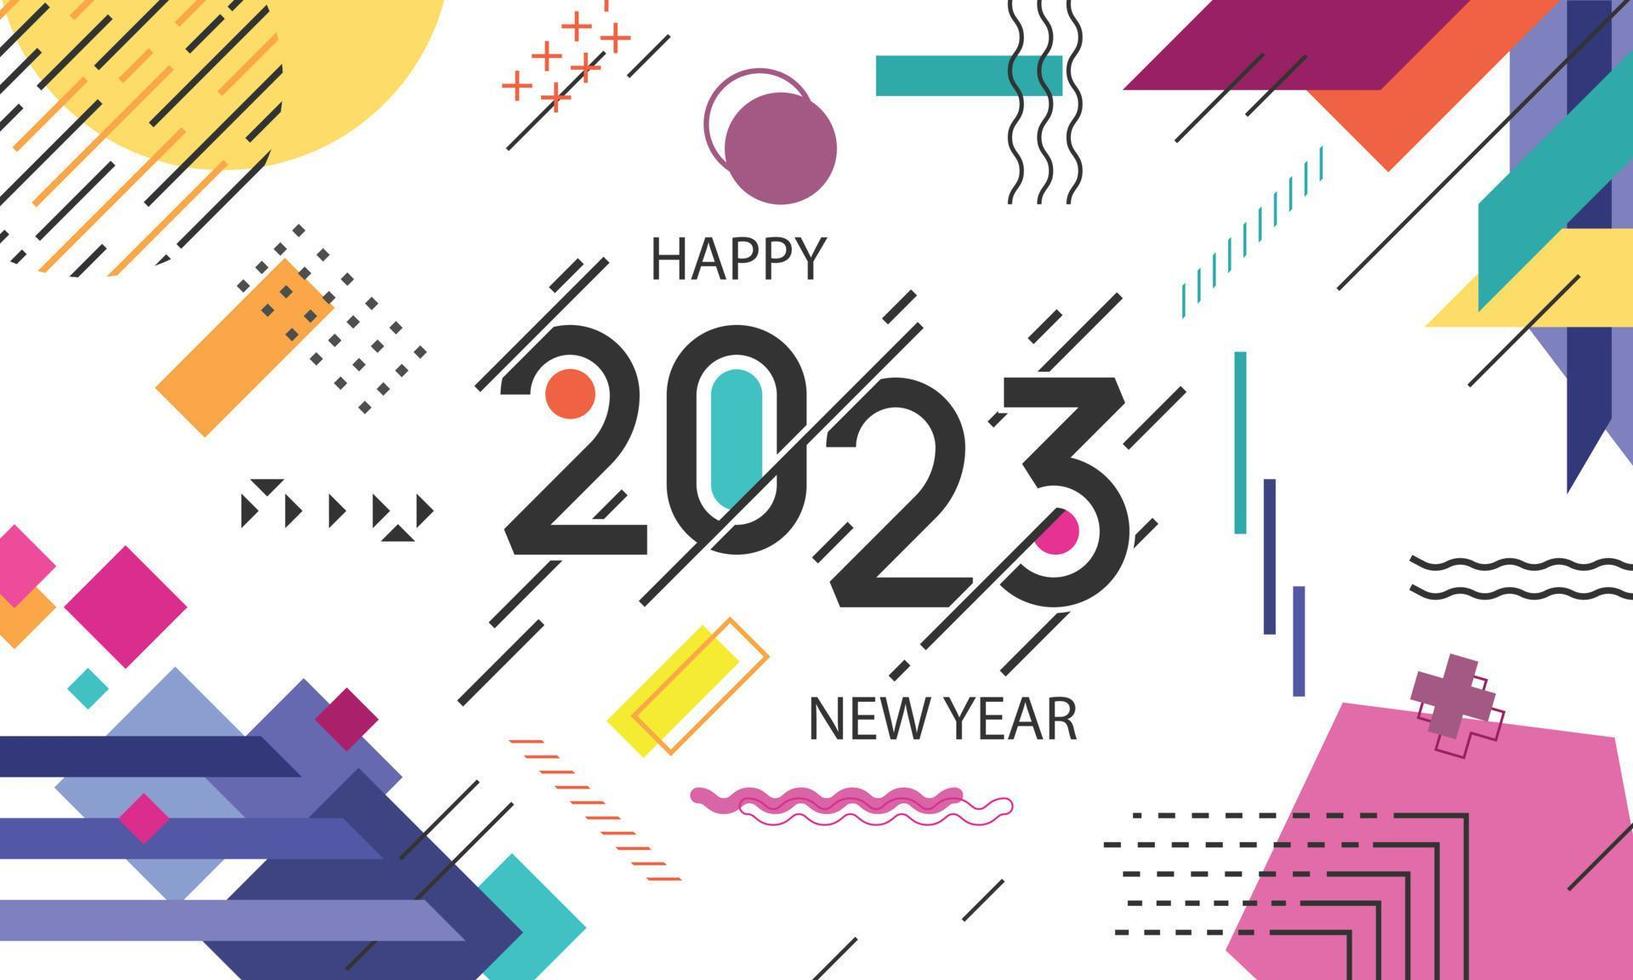 Happy new year 2023 illustration with modern geometric abstract design element. Suitable for banner, background, greeting card etc. vector